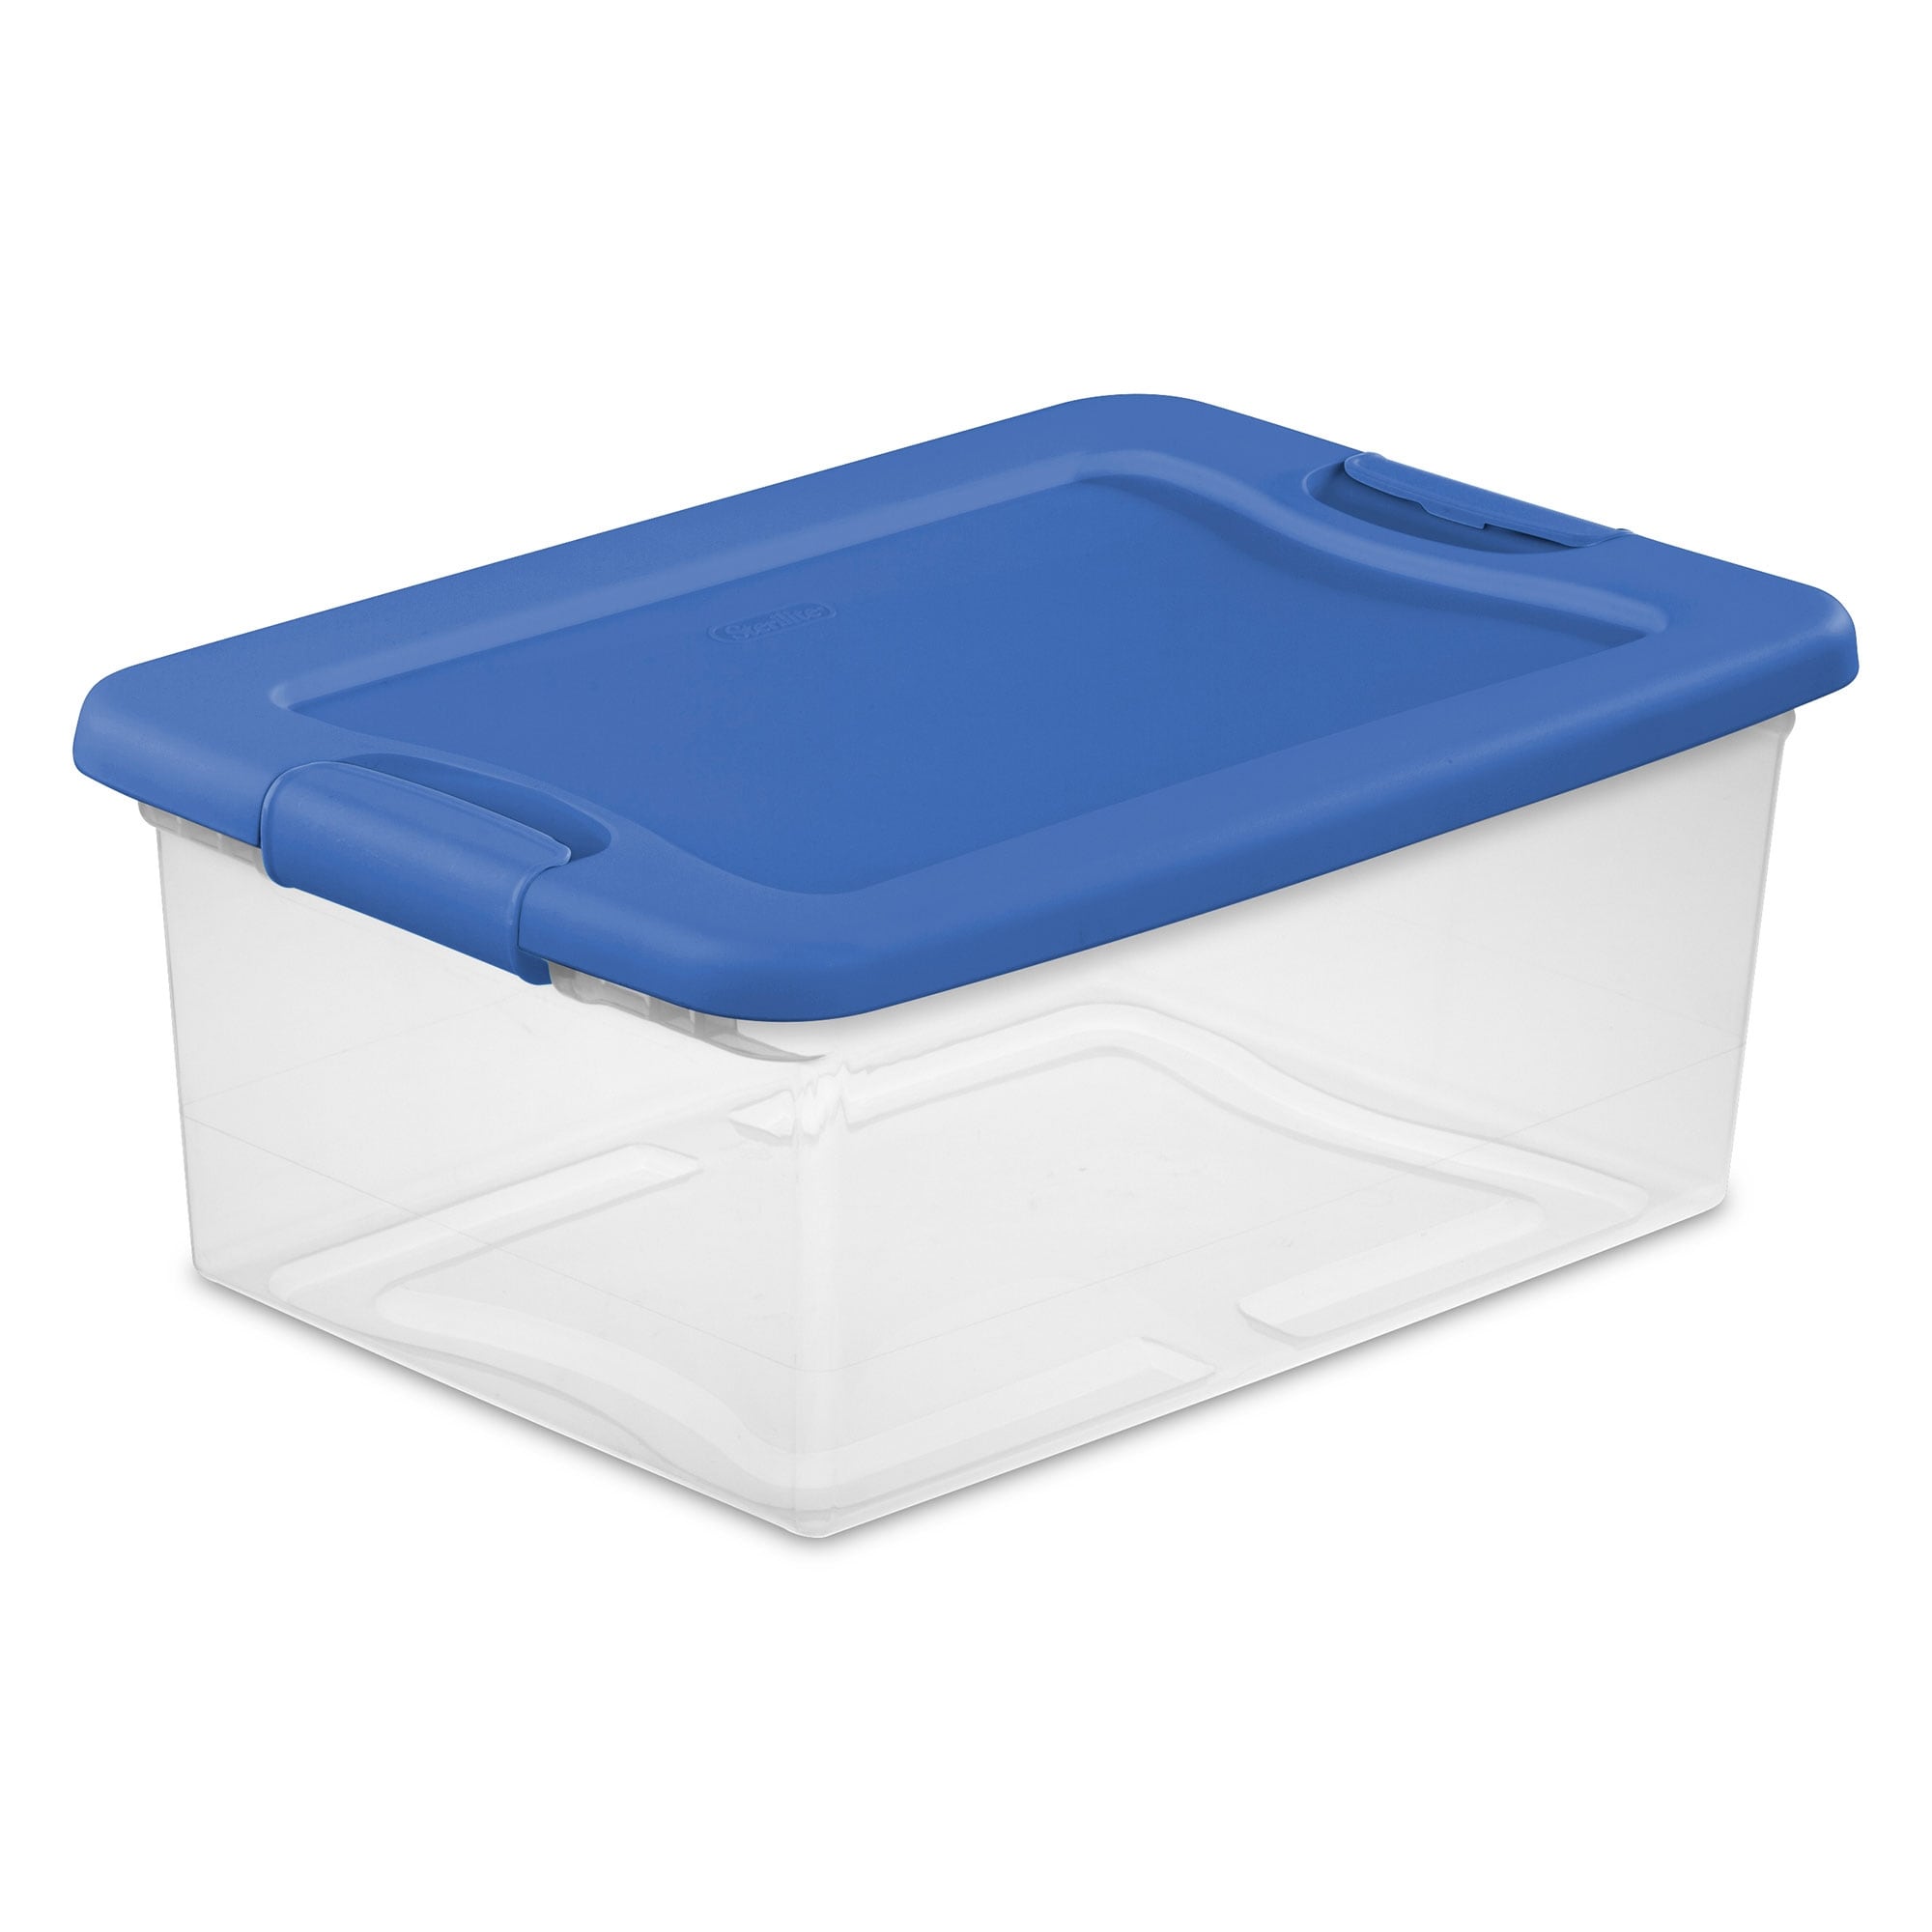 https://ak1.ostkcdn.com/images/products/is/images/direct/60f55bdb3ff445bd0fba3d5d803c1dc5a7c04cbd/Sterilite-15-Qt-Clear-Latching-Storage-Container-Organizing-Box%2C-Blue-%2824-Pack%29.jpg